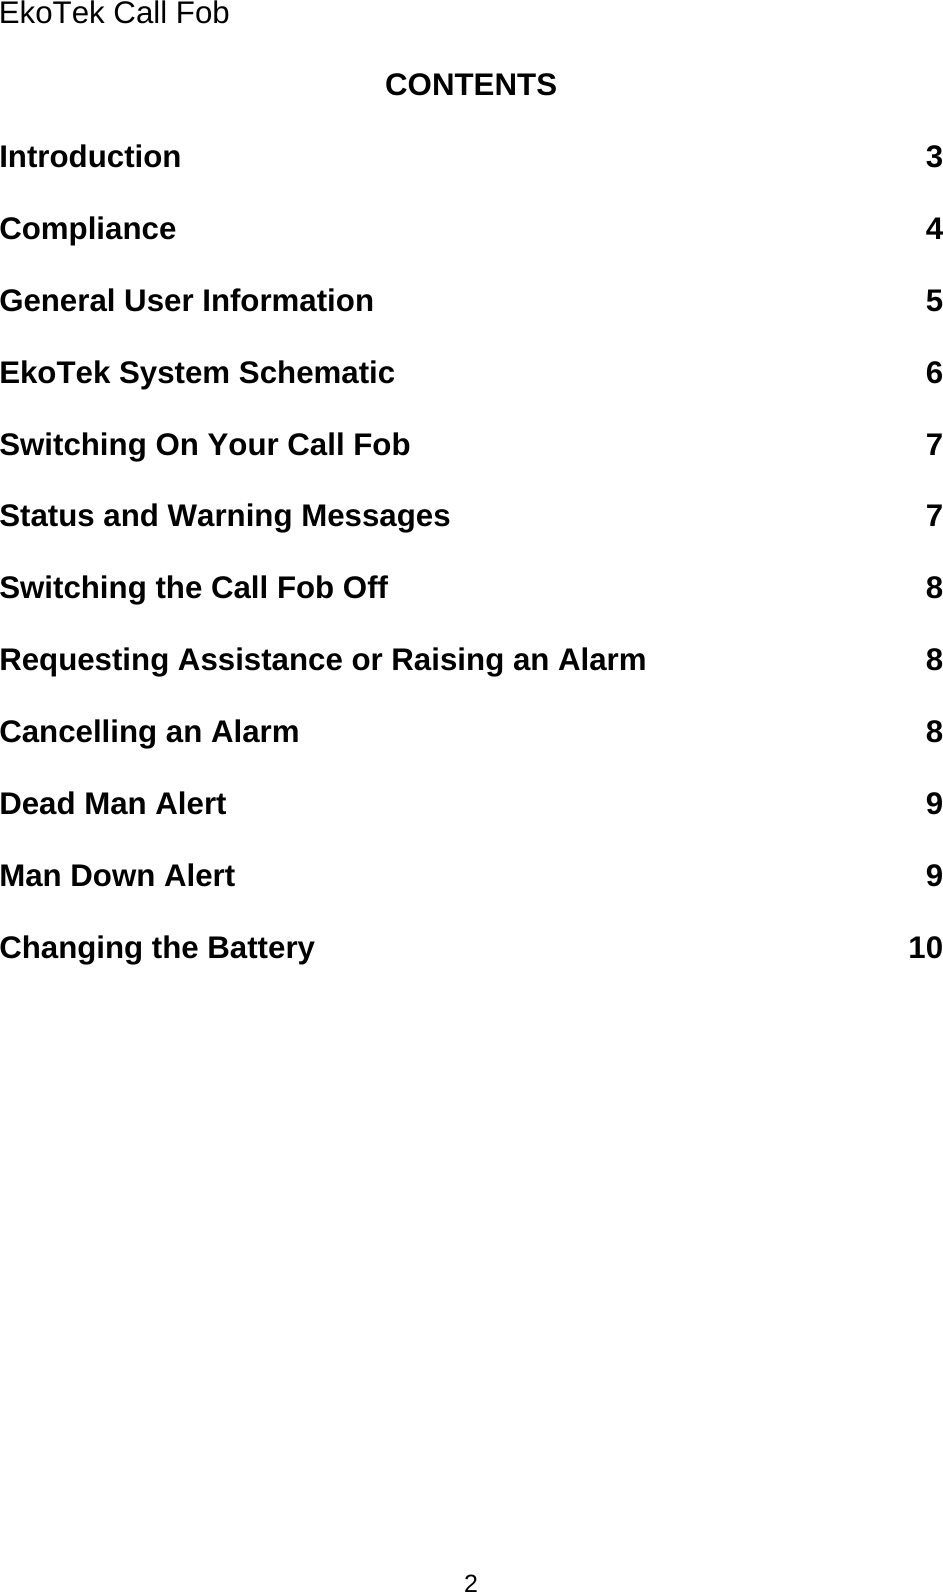 EkoTek Call Fob CONTENTS  Introduction 3  Compliance 4  General User Information 5  EkoTek System Schematic 6  Switching On Your Call Fob 7  Status and Warning Messages 7  Switching the Call Fob Off 8  Requesting Assistance or Raising an Alarm 8  Cancelling an Alarm 8  Dead Man Alert 9  Man Down Alert 9  Changing the Battery 10 2 